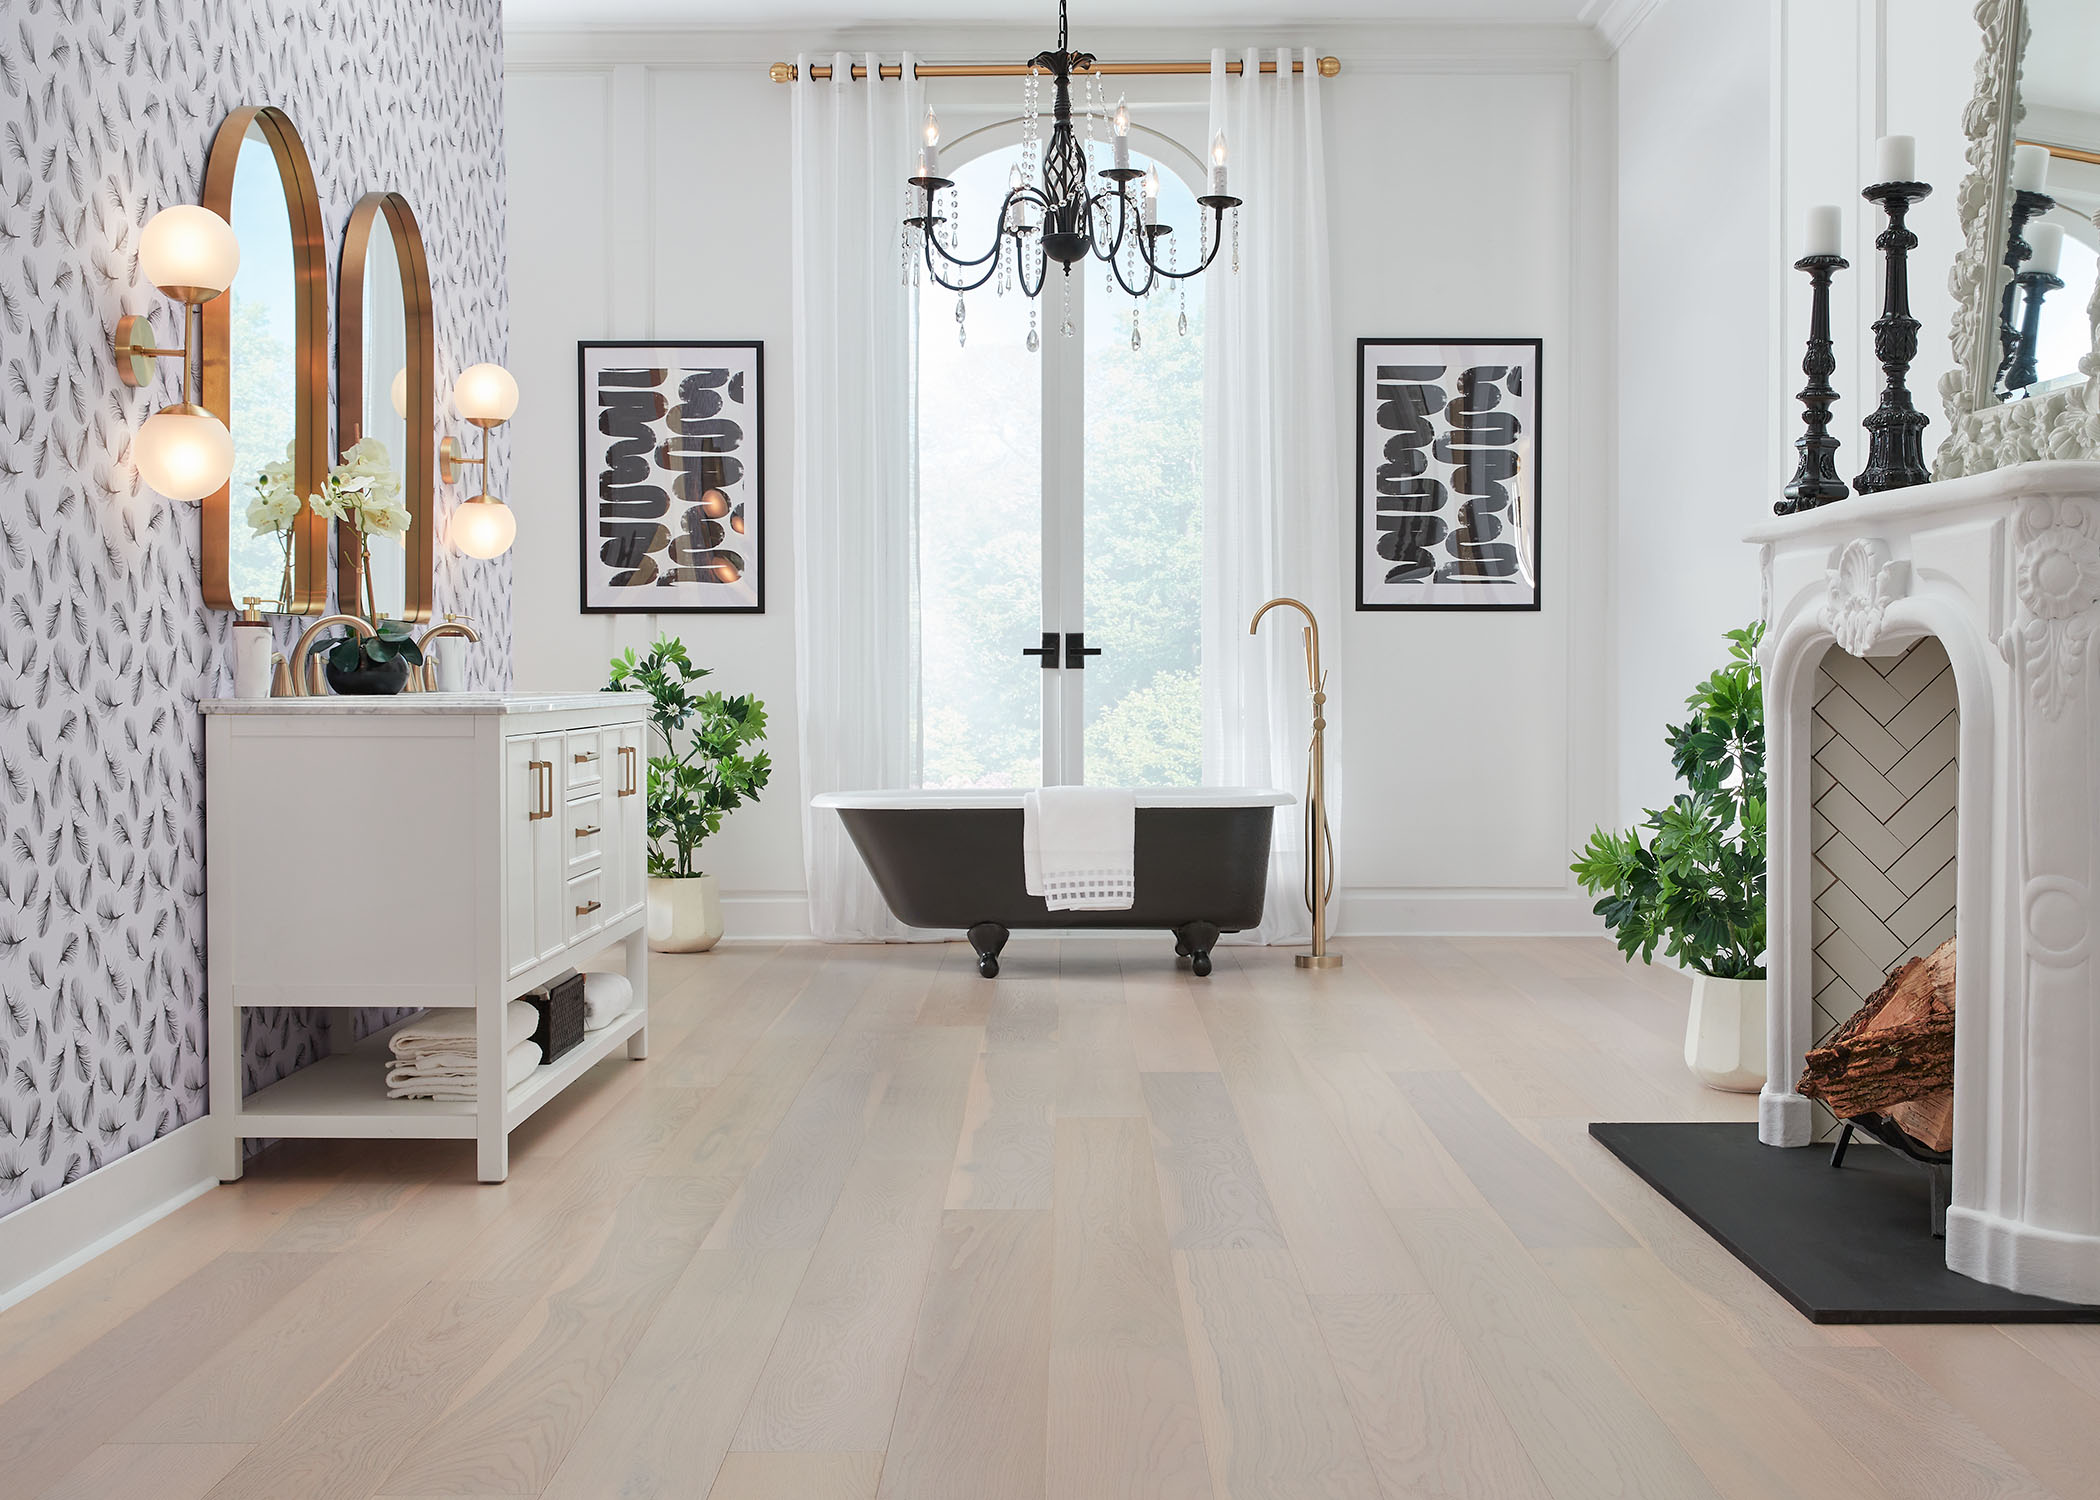 white washed water resistant engineered hardwood floor in bathroom with black clawfoot tub with black chandelier and white ornate fireplace and black and white wallpaper